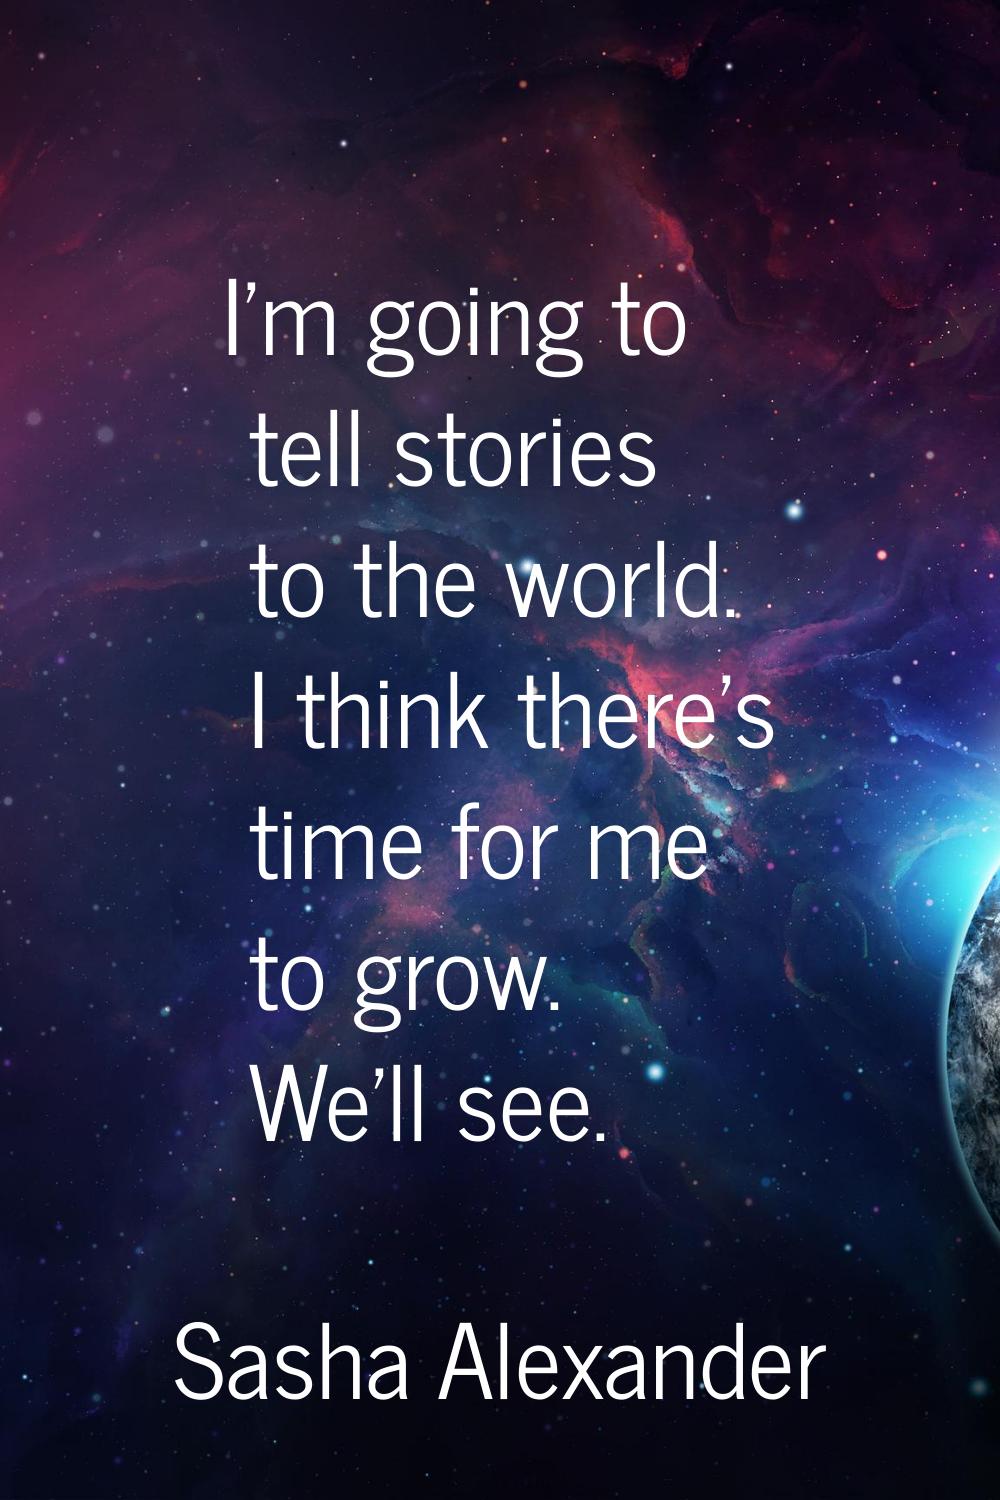 I'm going to tell stories to the world. I think there's time for me to grow. We'll see.